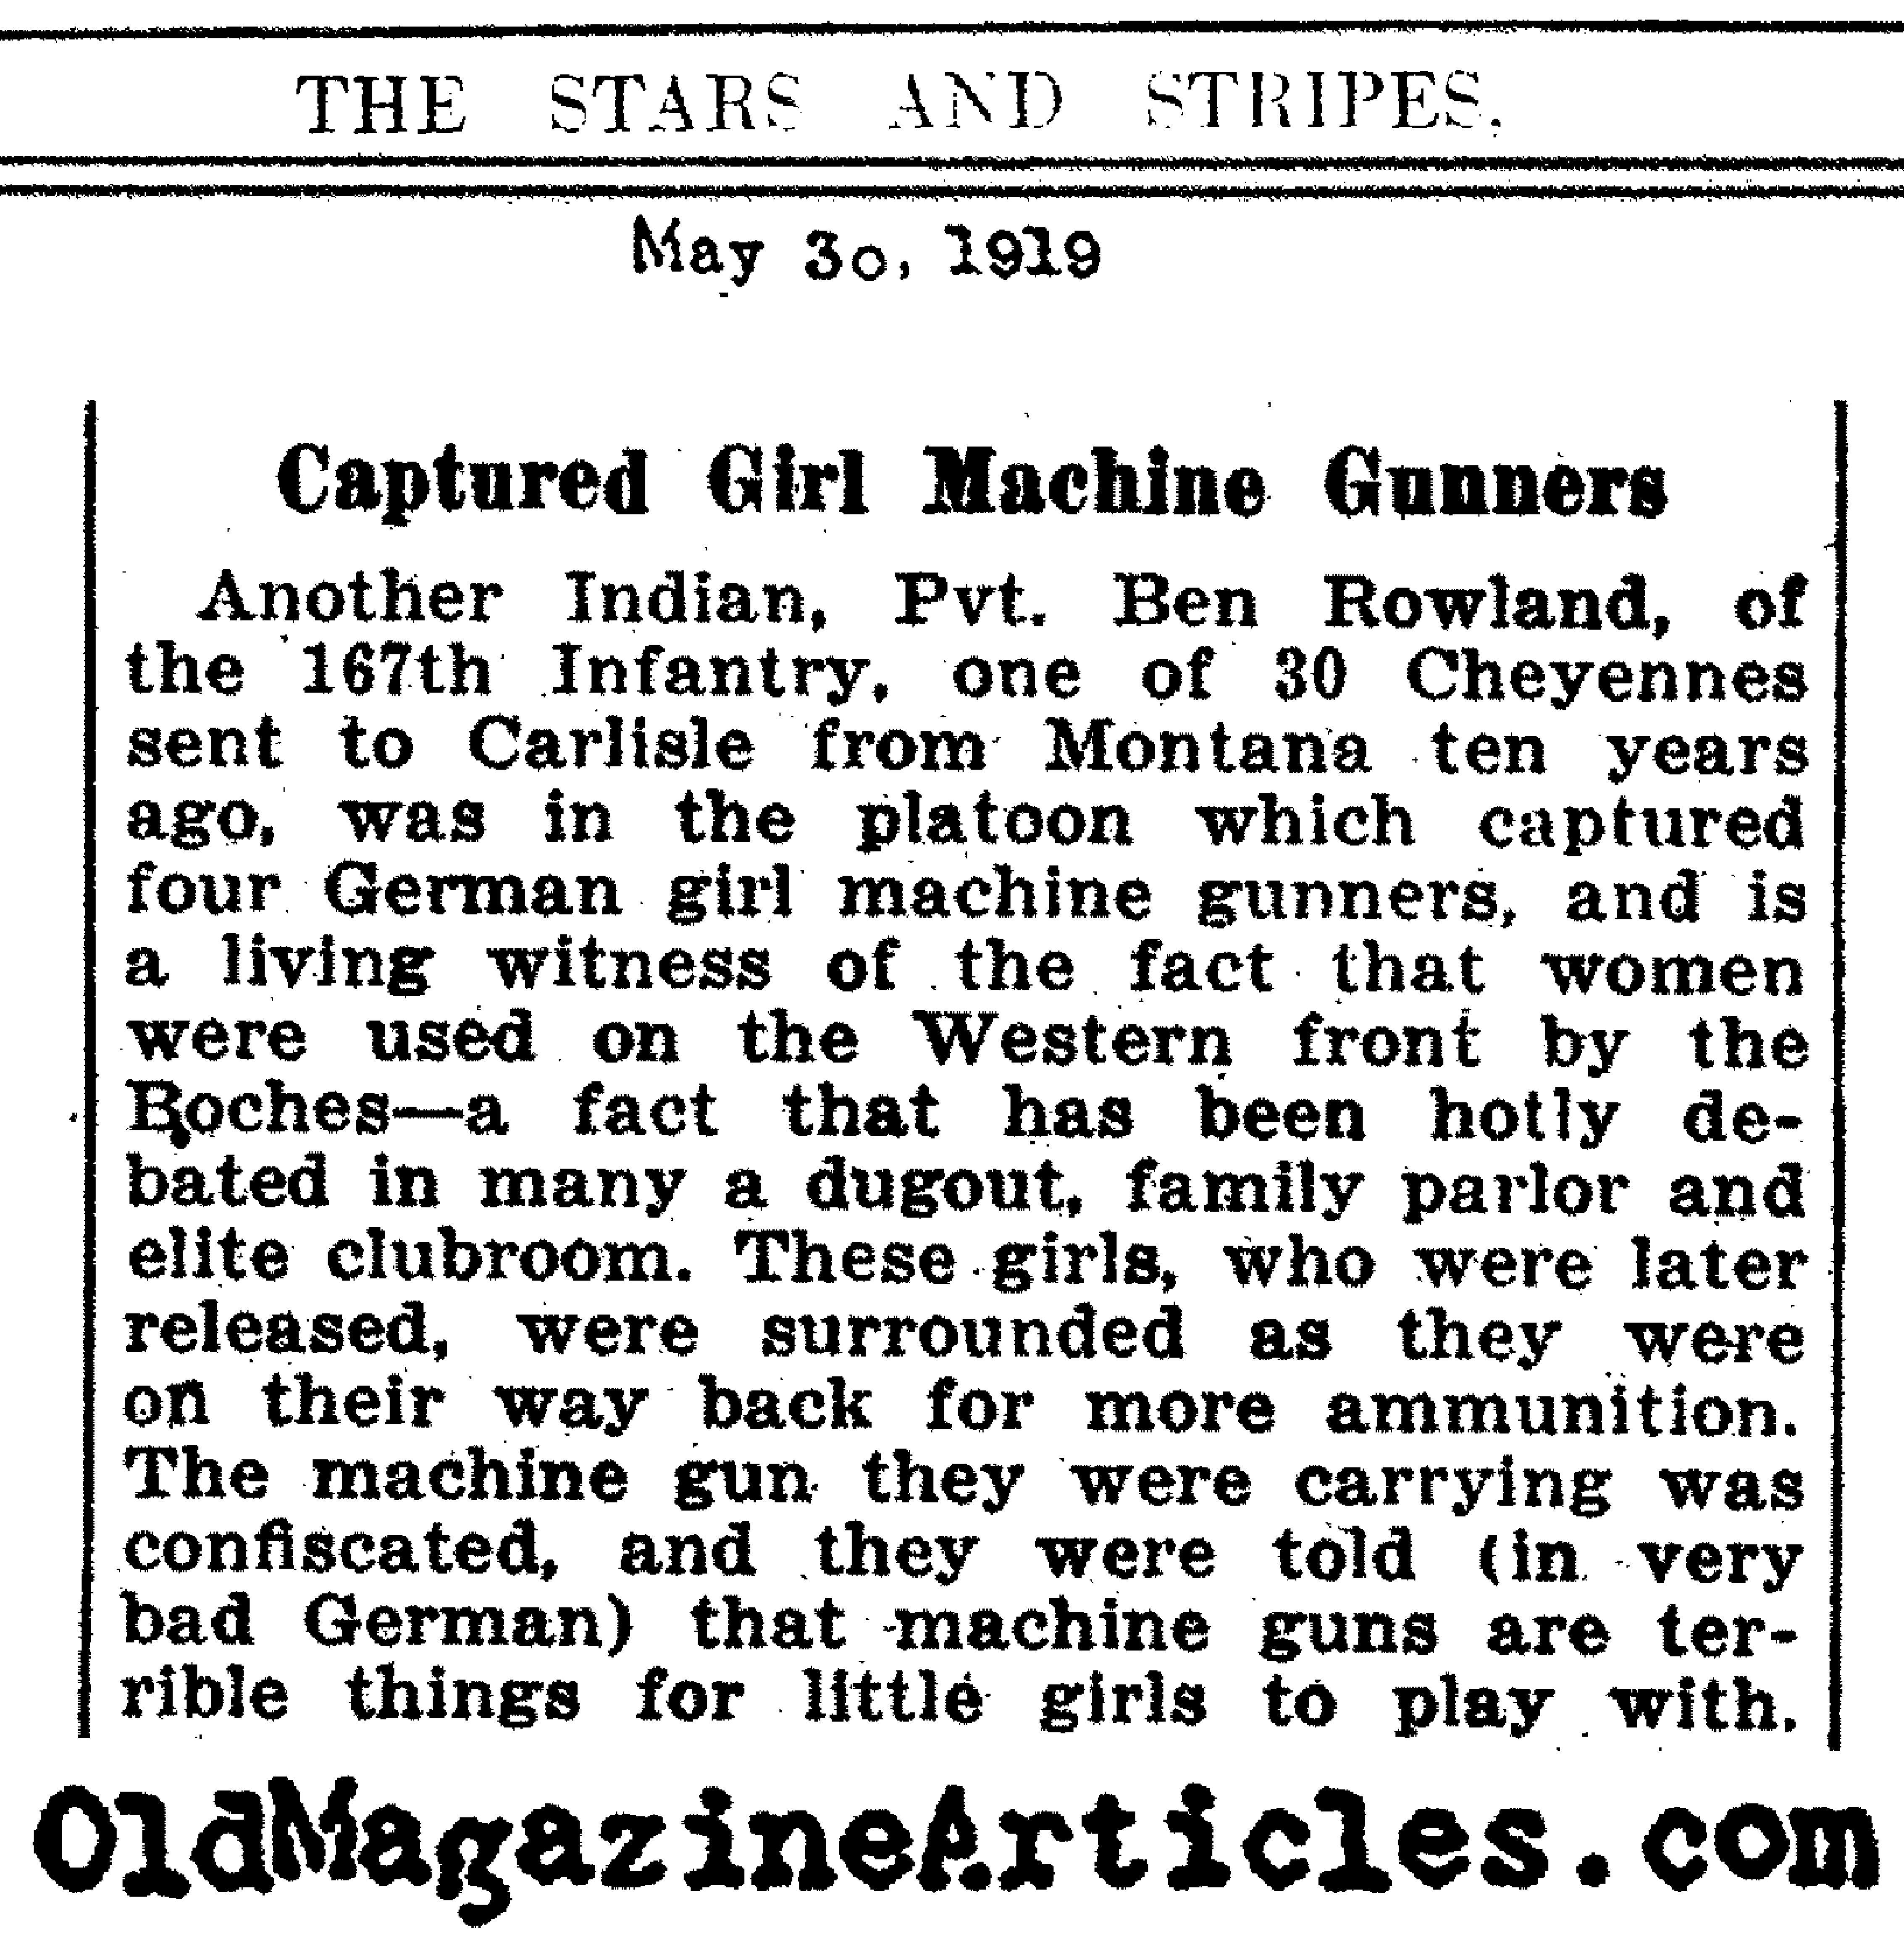 Had Germany Really Deployed Women Soldiers?  (The Stars and Stripes, 1919)